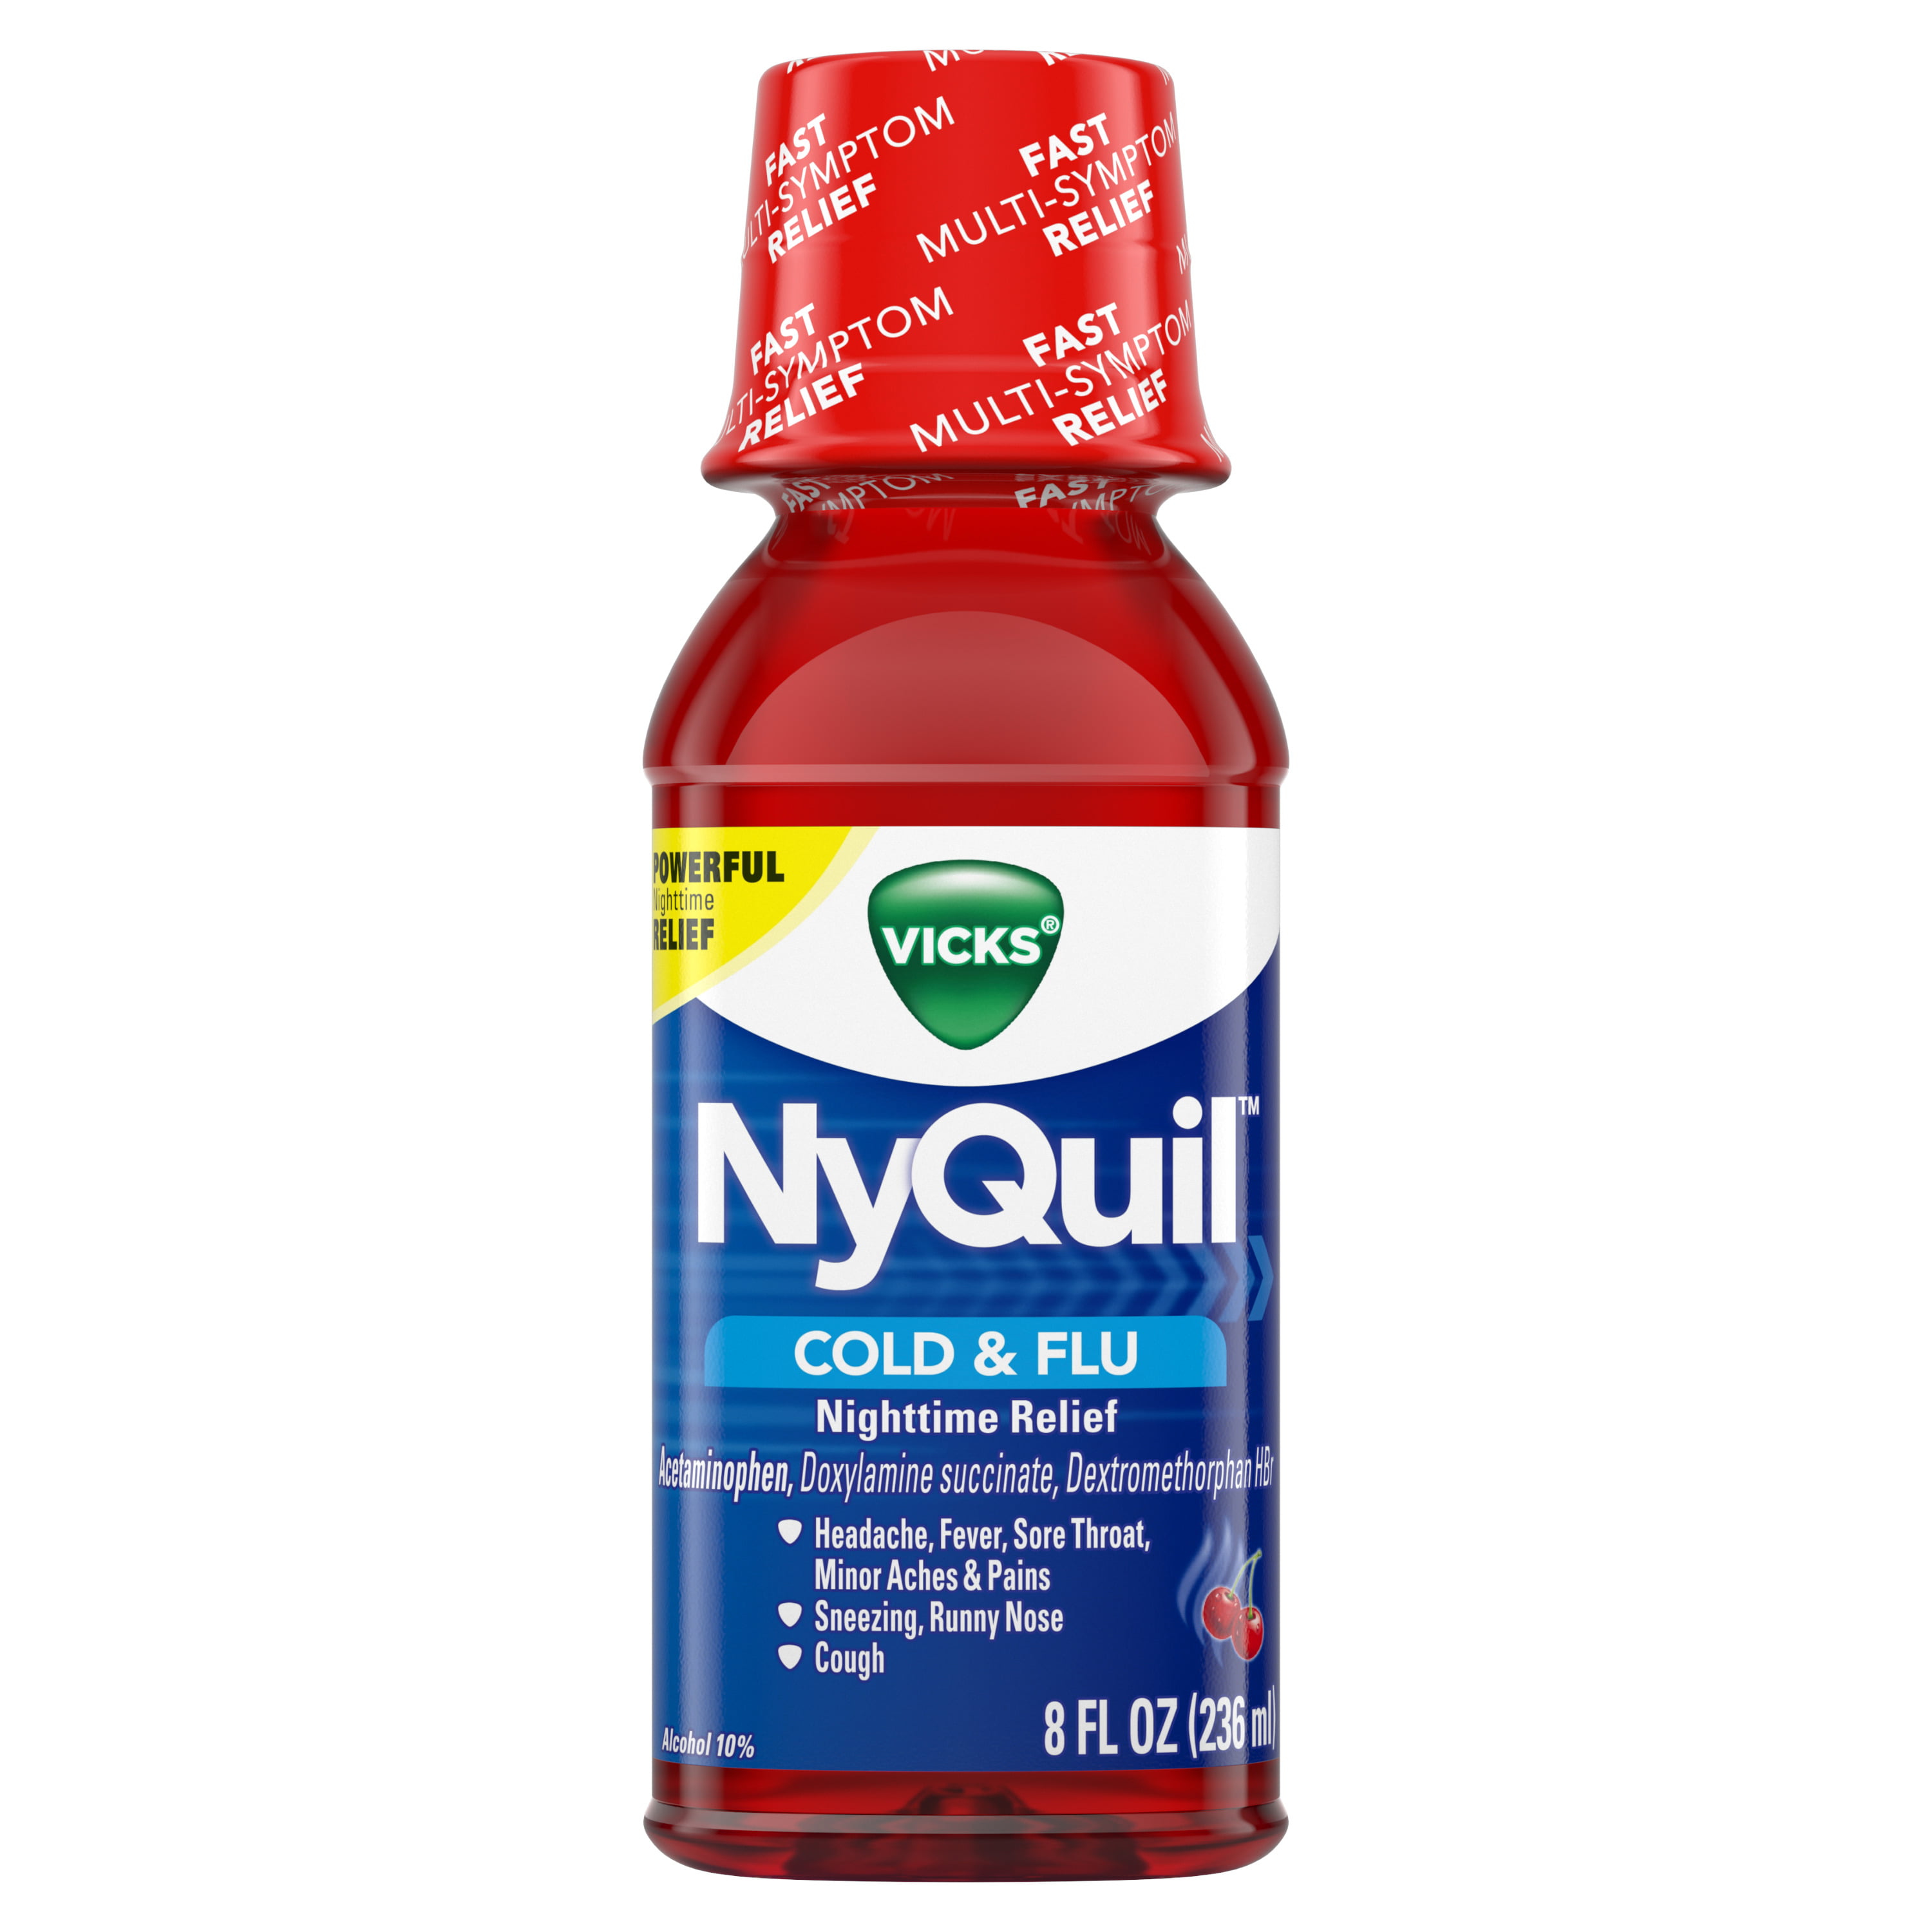 vicks-nyquil-nighttime-cold-flu-symptom-relief-relives-aches-fever